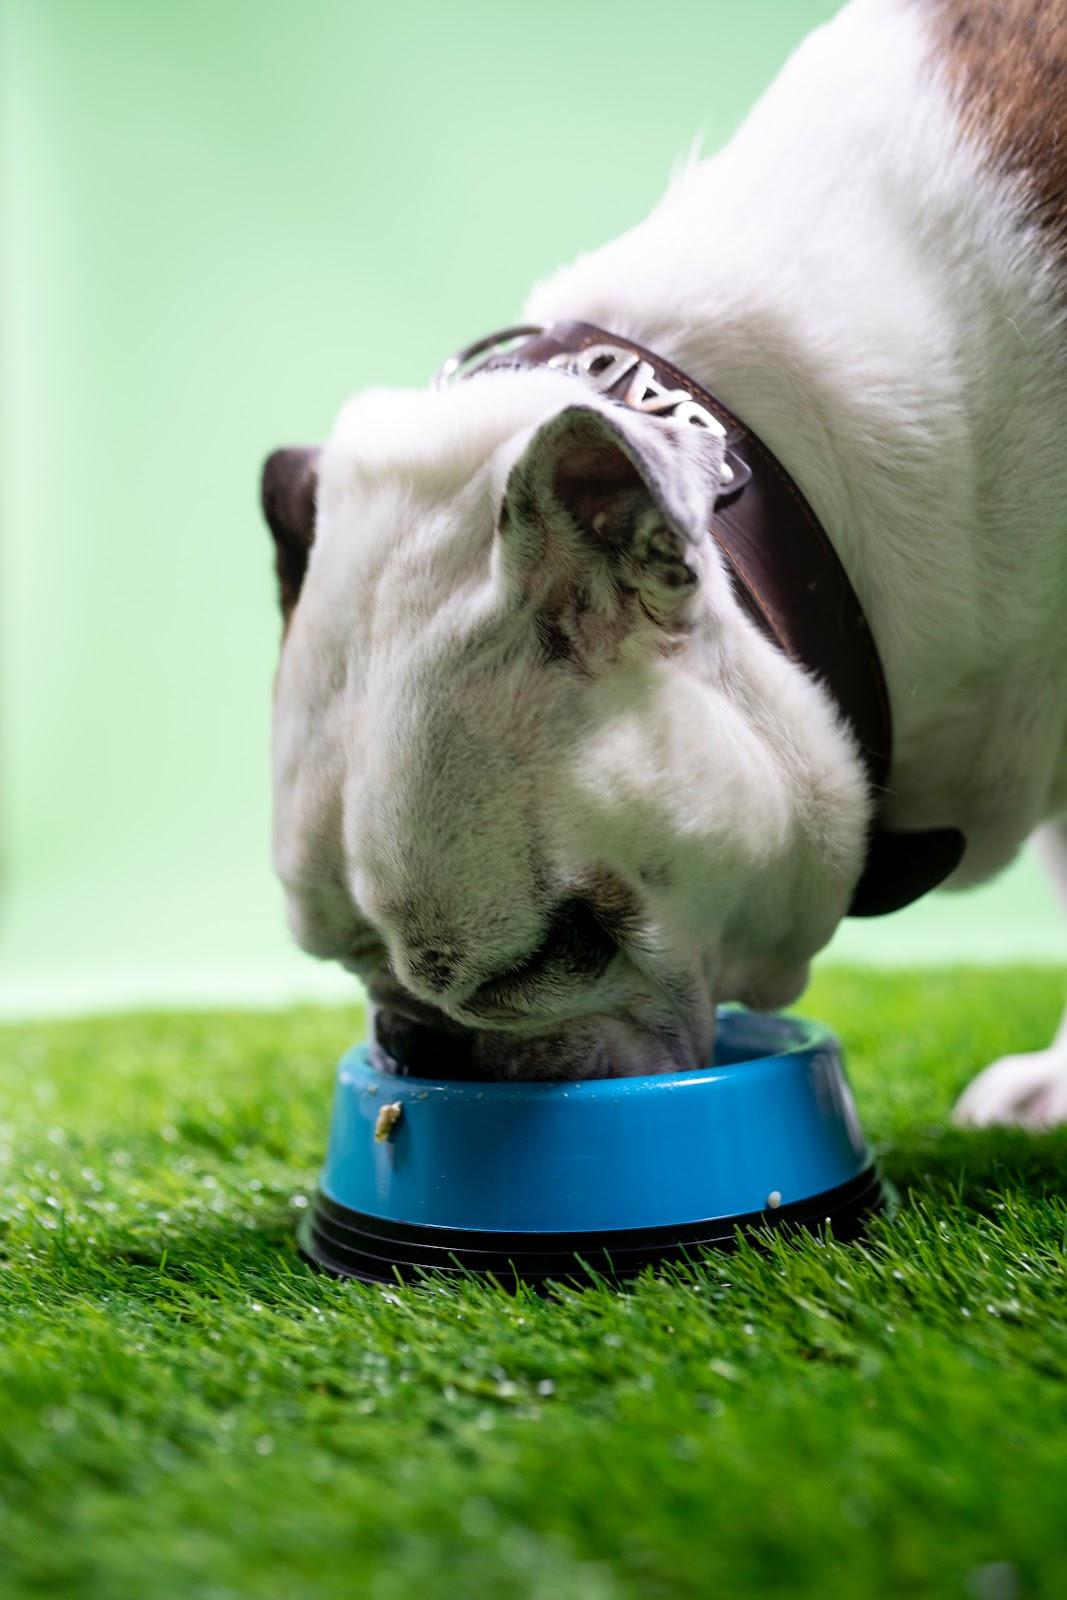 Young dog eating supplements out of a bowl on the grass